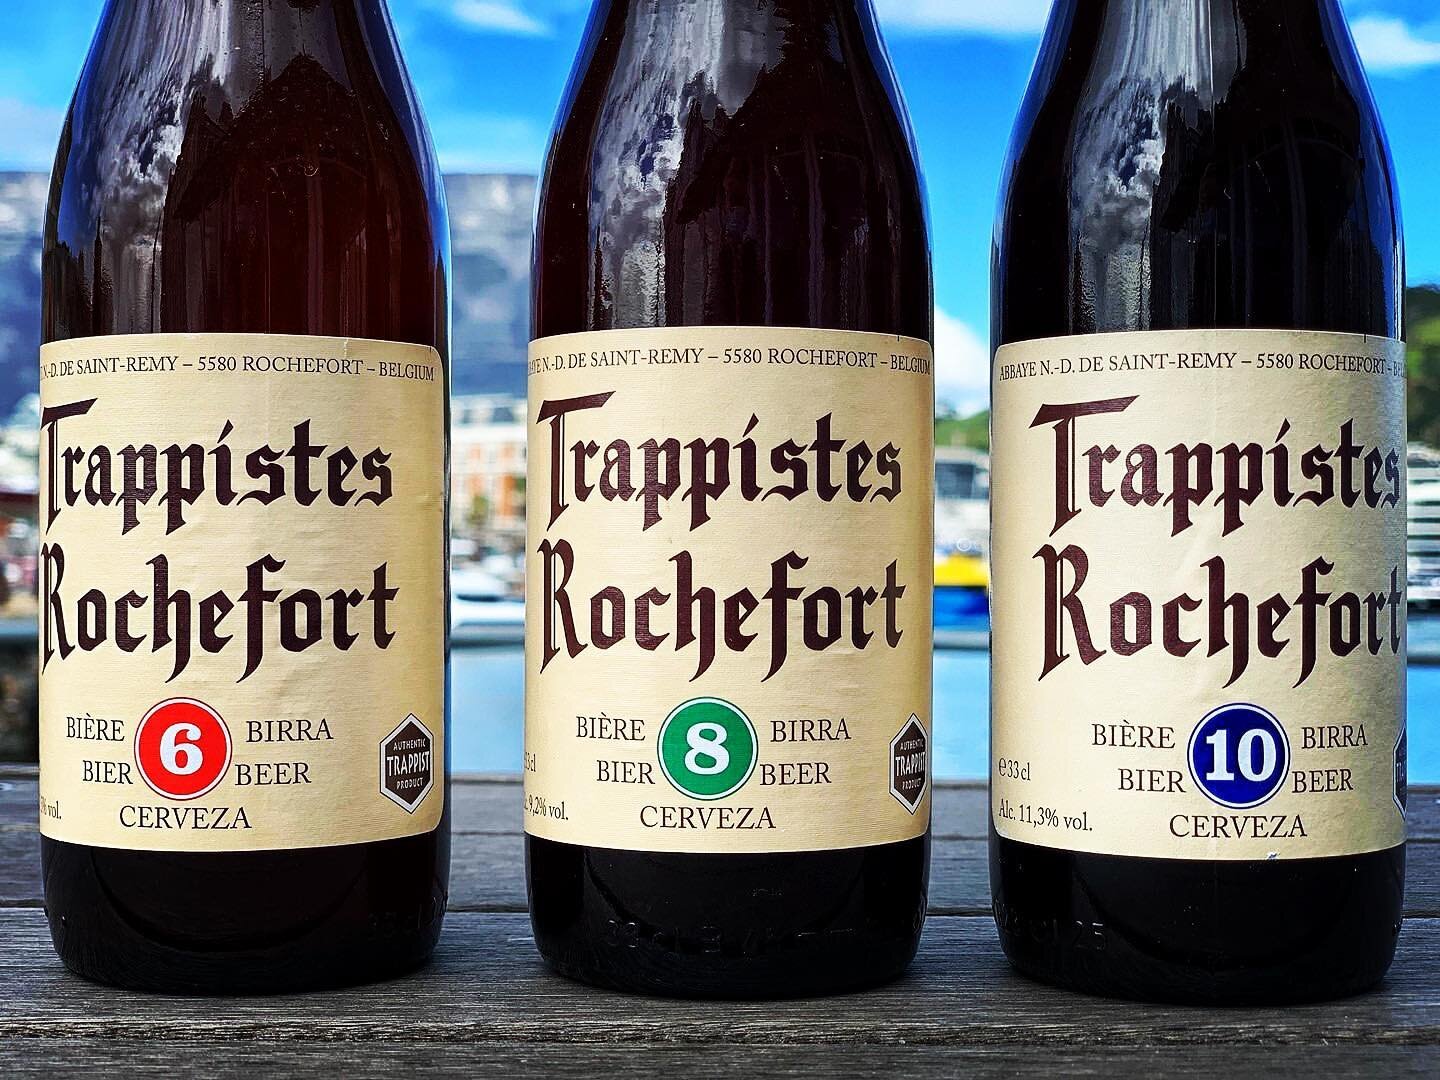 @den_anker done a brilliant job explaining 🎊✋

Ever wondered what those numbers mean on some Belgian Beers like these Trappist Rochefort?  At first glance, those numbers might seem to refer to alcohol content, but the answer is not that straightforw